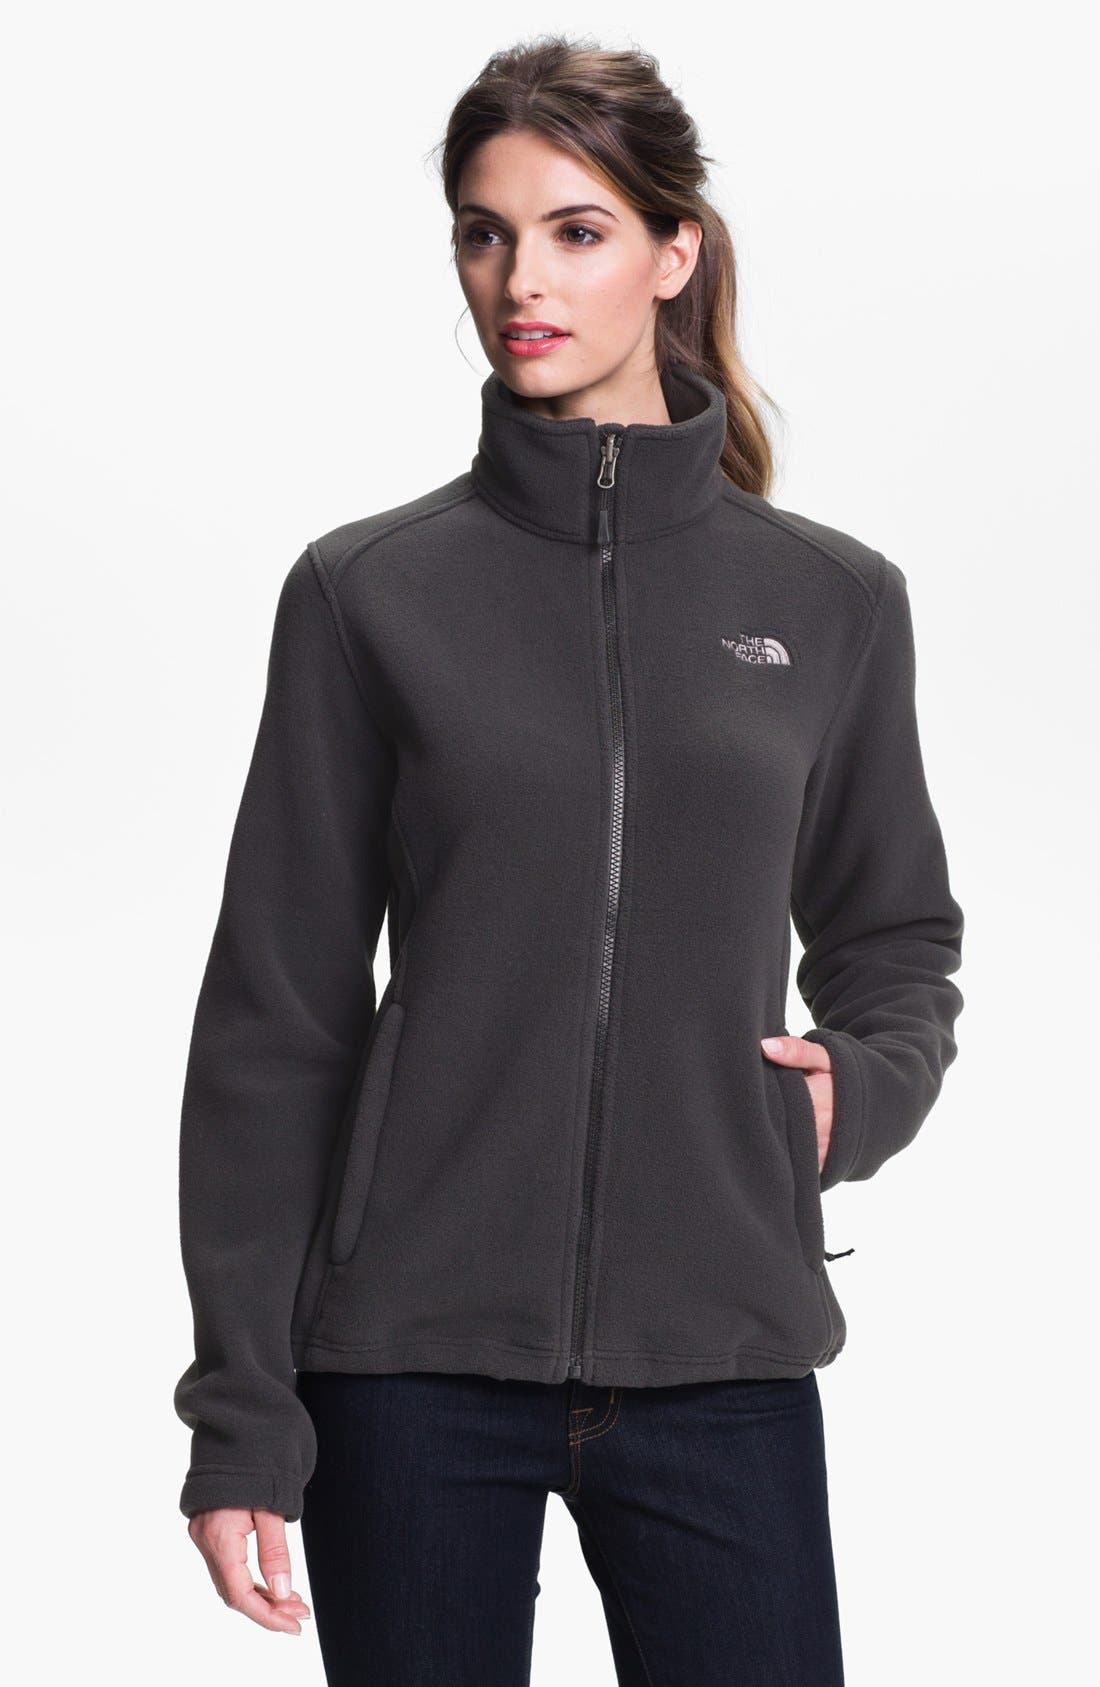 north face 300 series